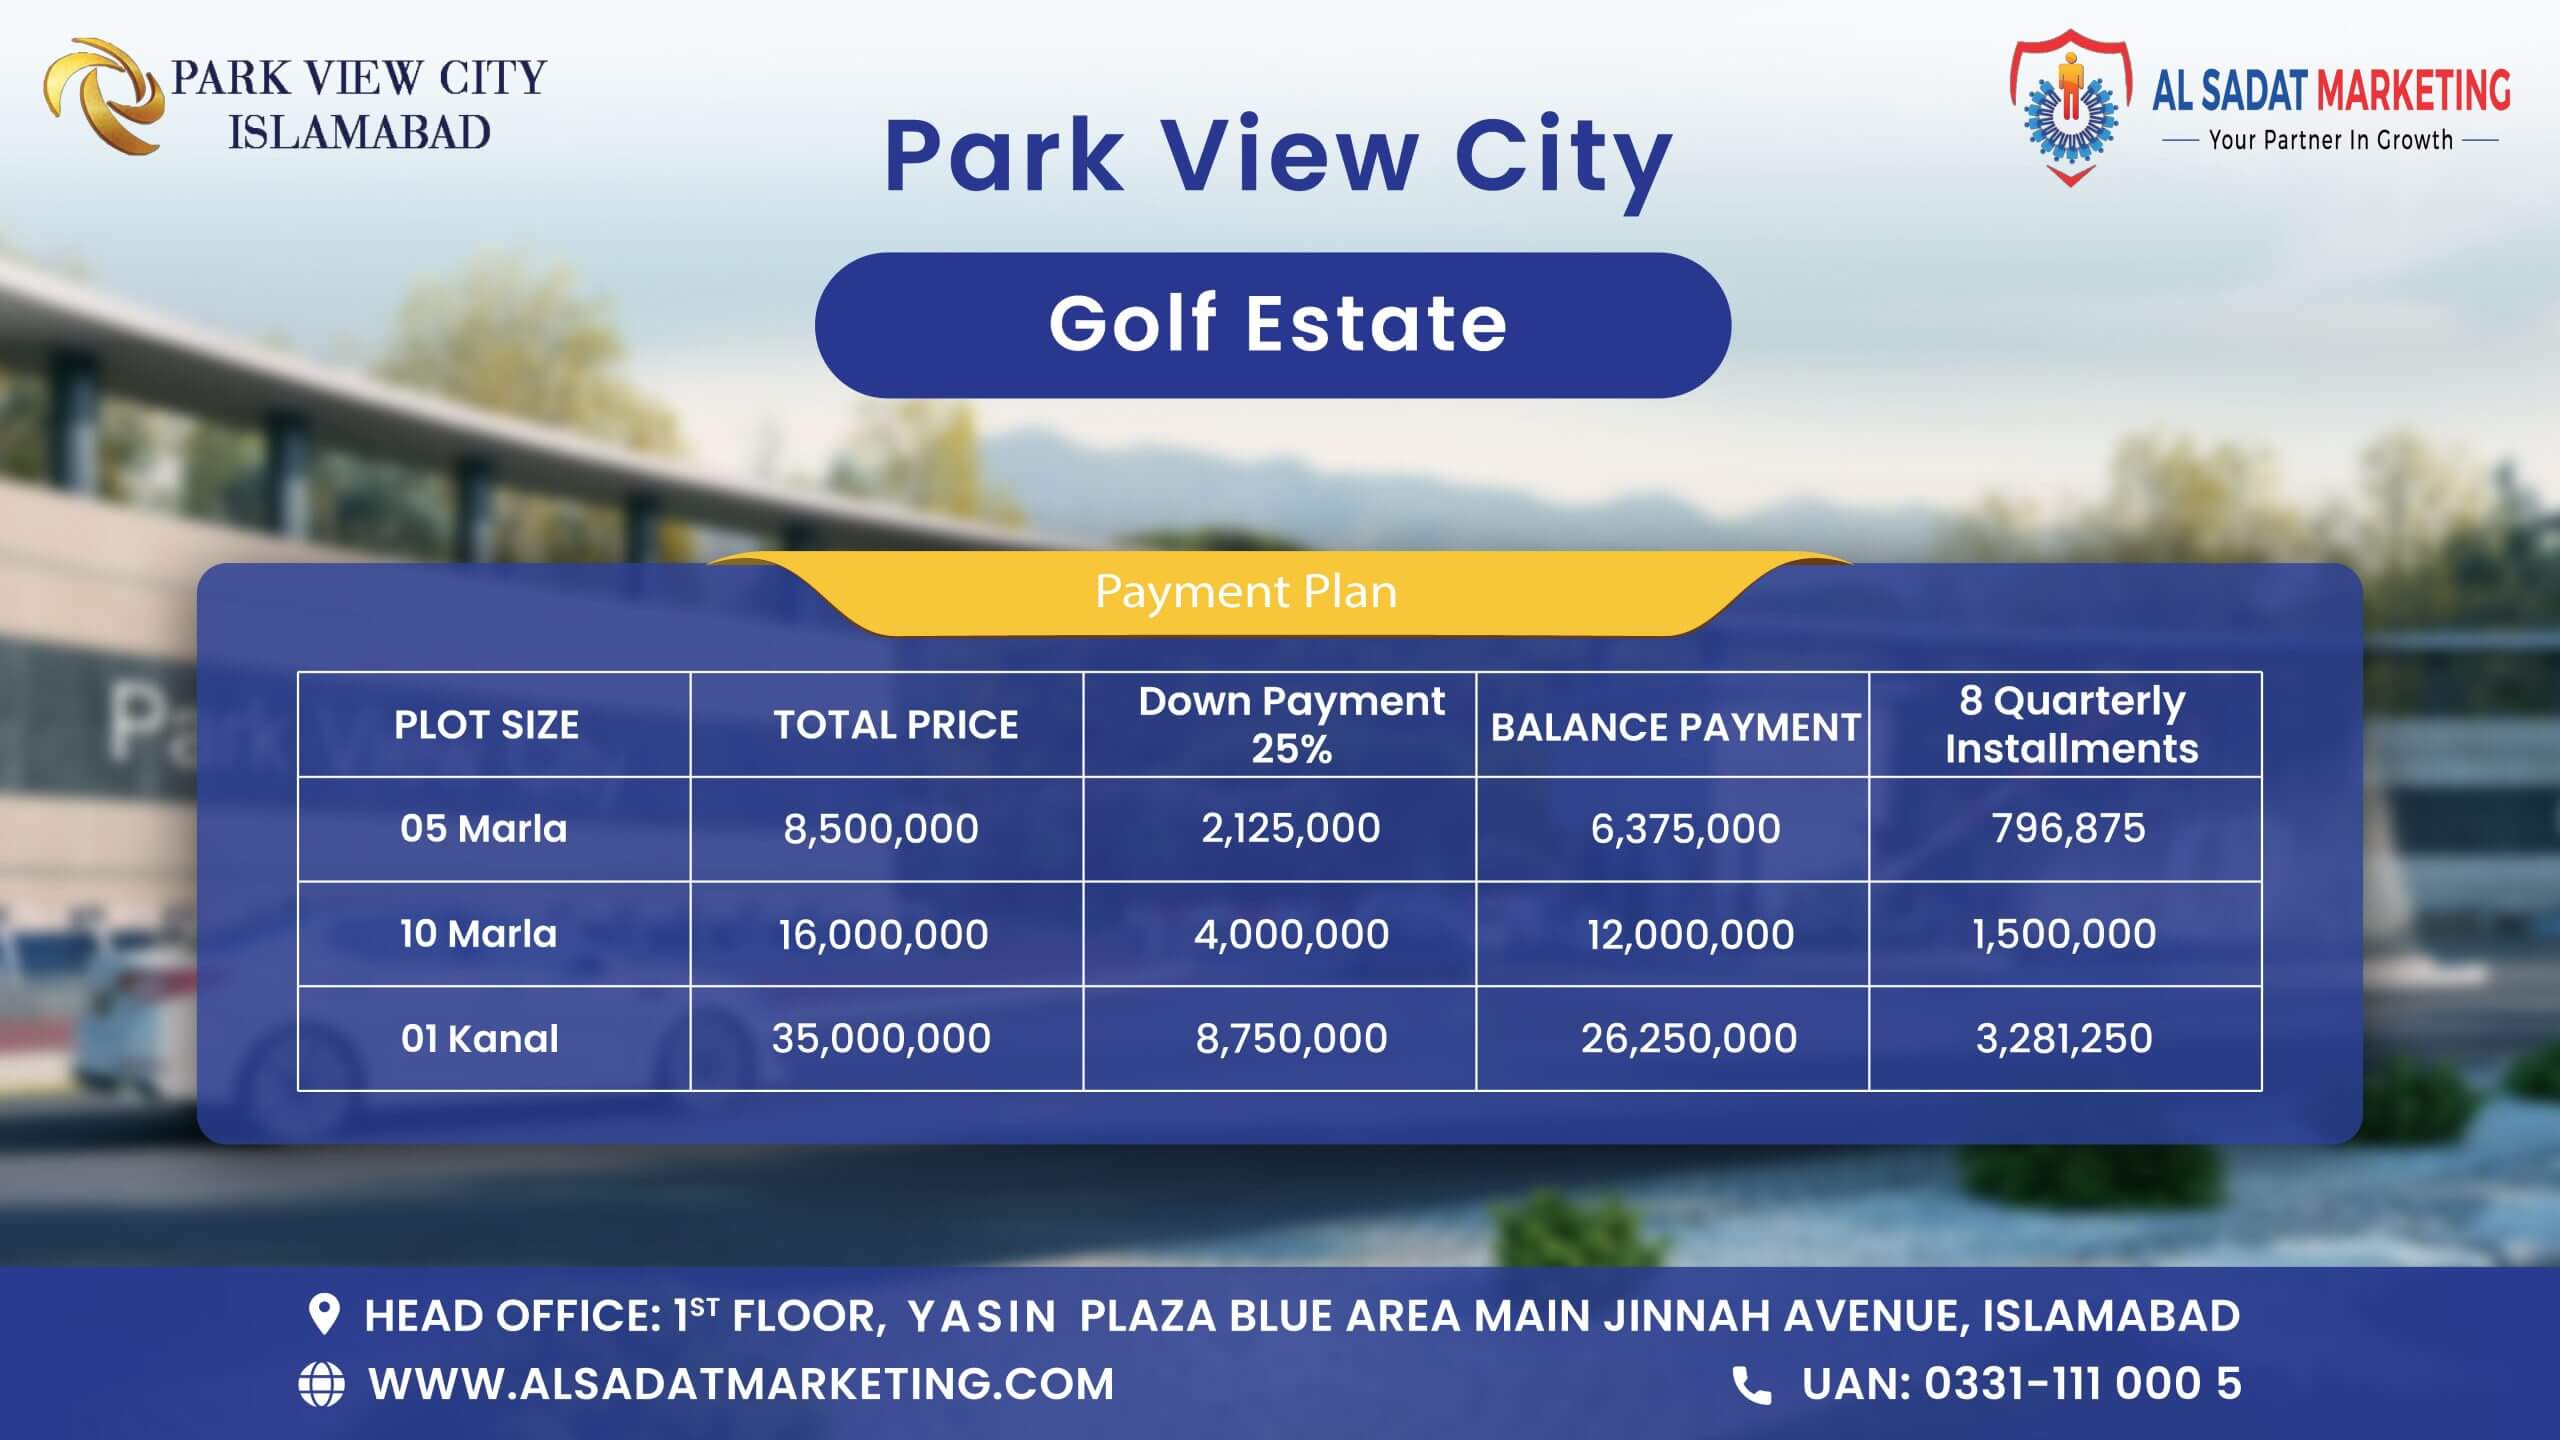 park view city islamabad golf estate updated payment plan - park view city golf estate updated payment plan - park view city islamabad payment plan - park view city payment plan - payment plan of park view city islamabad – payment plan of park view city – park view city islamabad – park view city – park view city housing society - park view city islamabad housing society – park view city real estate project - park view city islamabad real estate project - al sadat marketing - alsadat marketing - al-sadat marketing